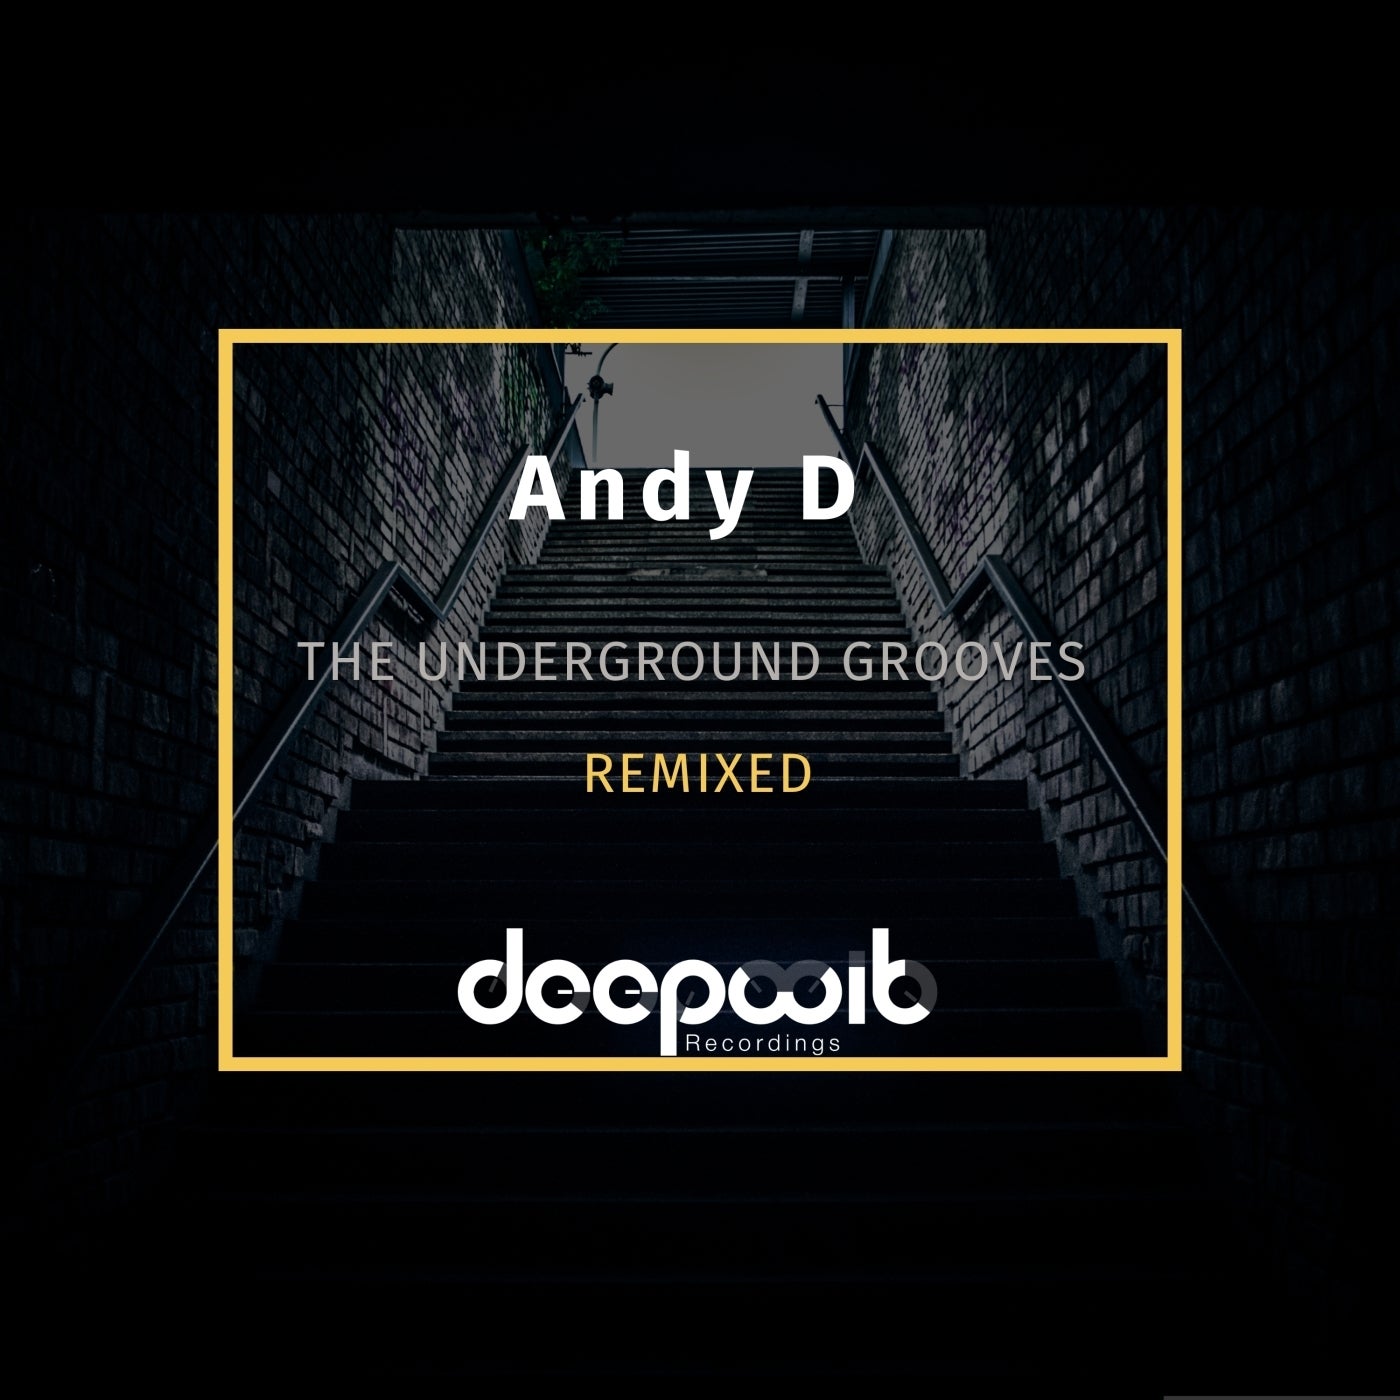 The Underground Grooves Remixed